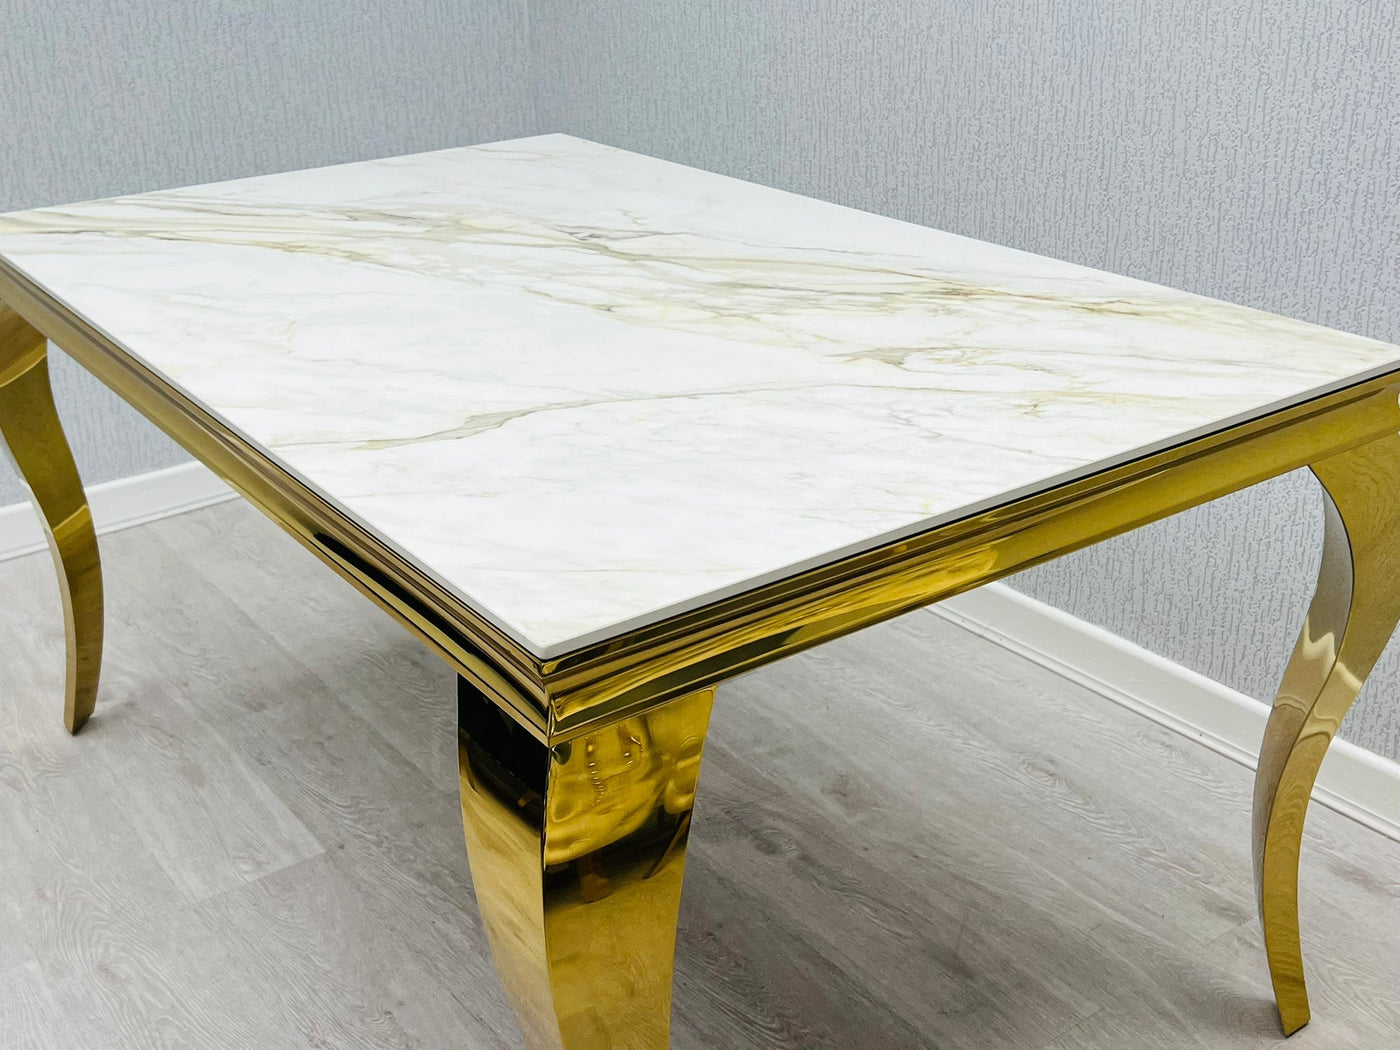 Louis Gold Cream Marble Dining Table With Shimmer Gold Ring Knocker Dining Chairs